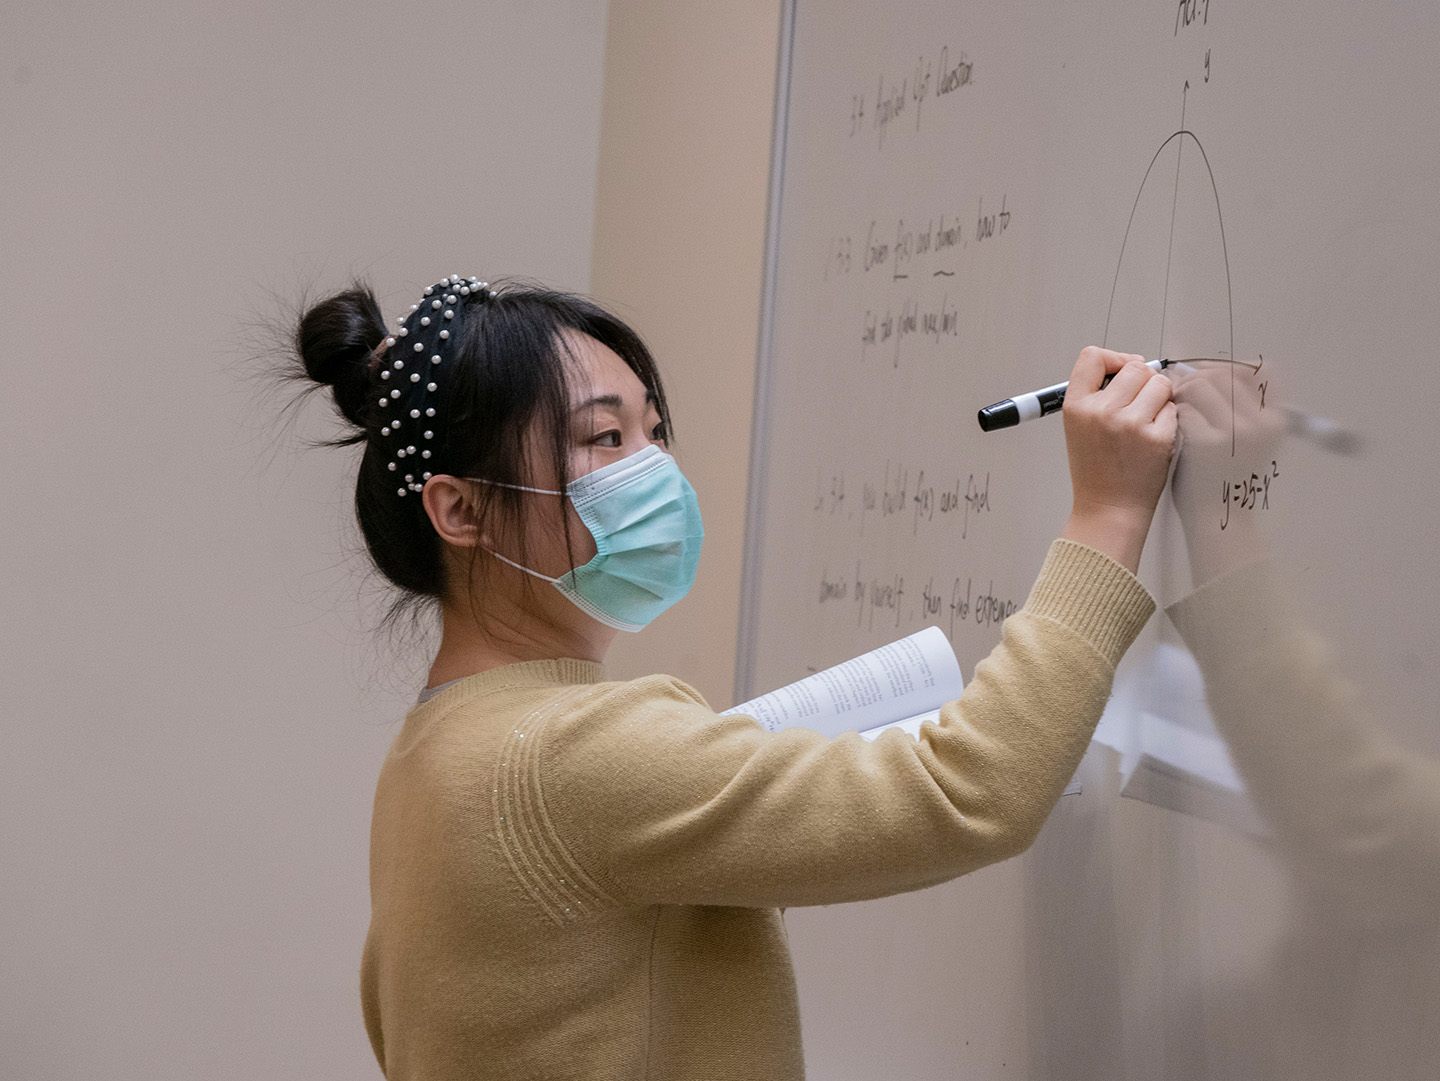 Woman actuarial science professor writing on whiteboard